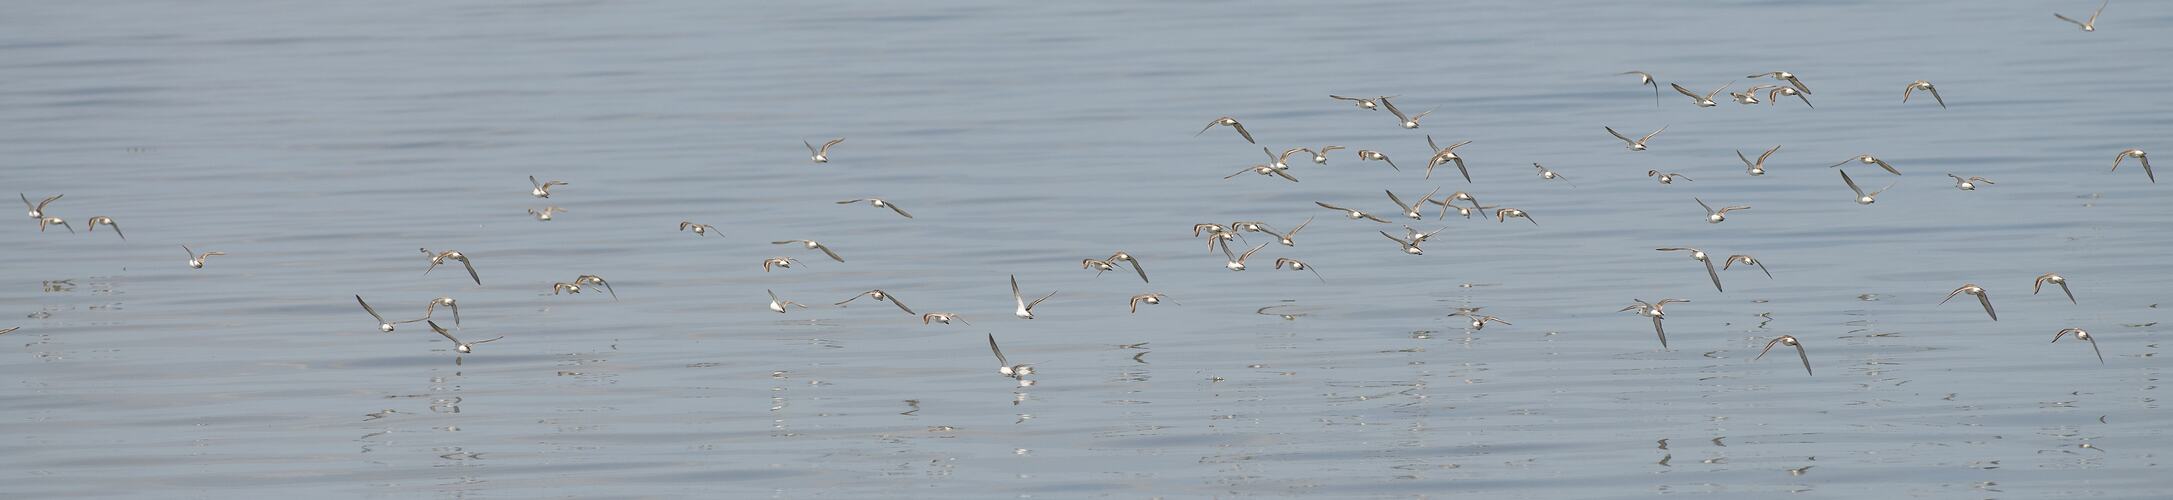 Many white birds in flight over water.